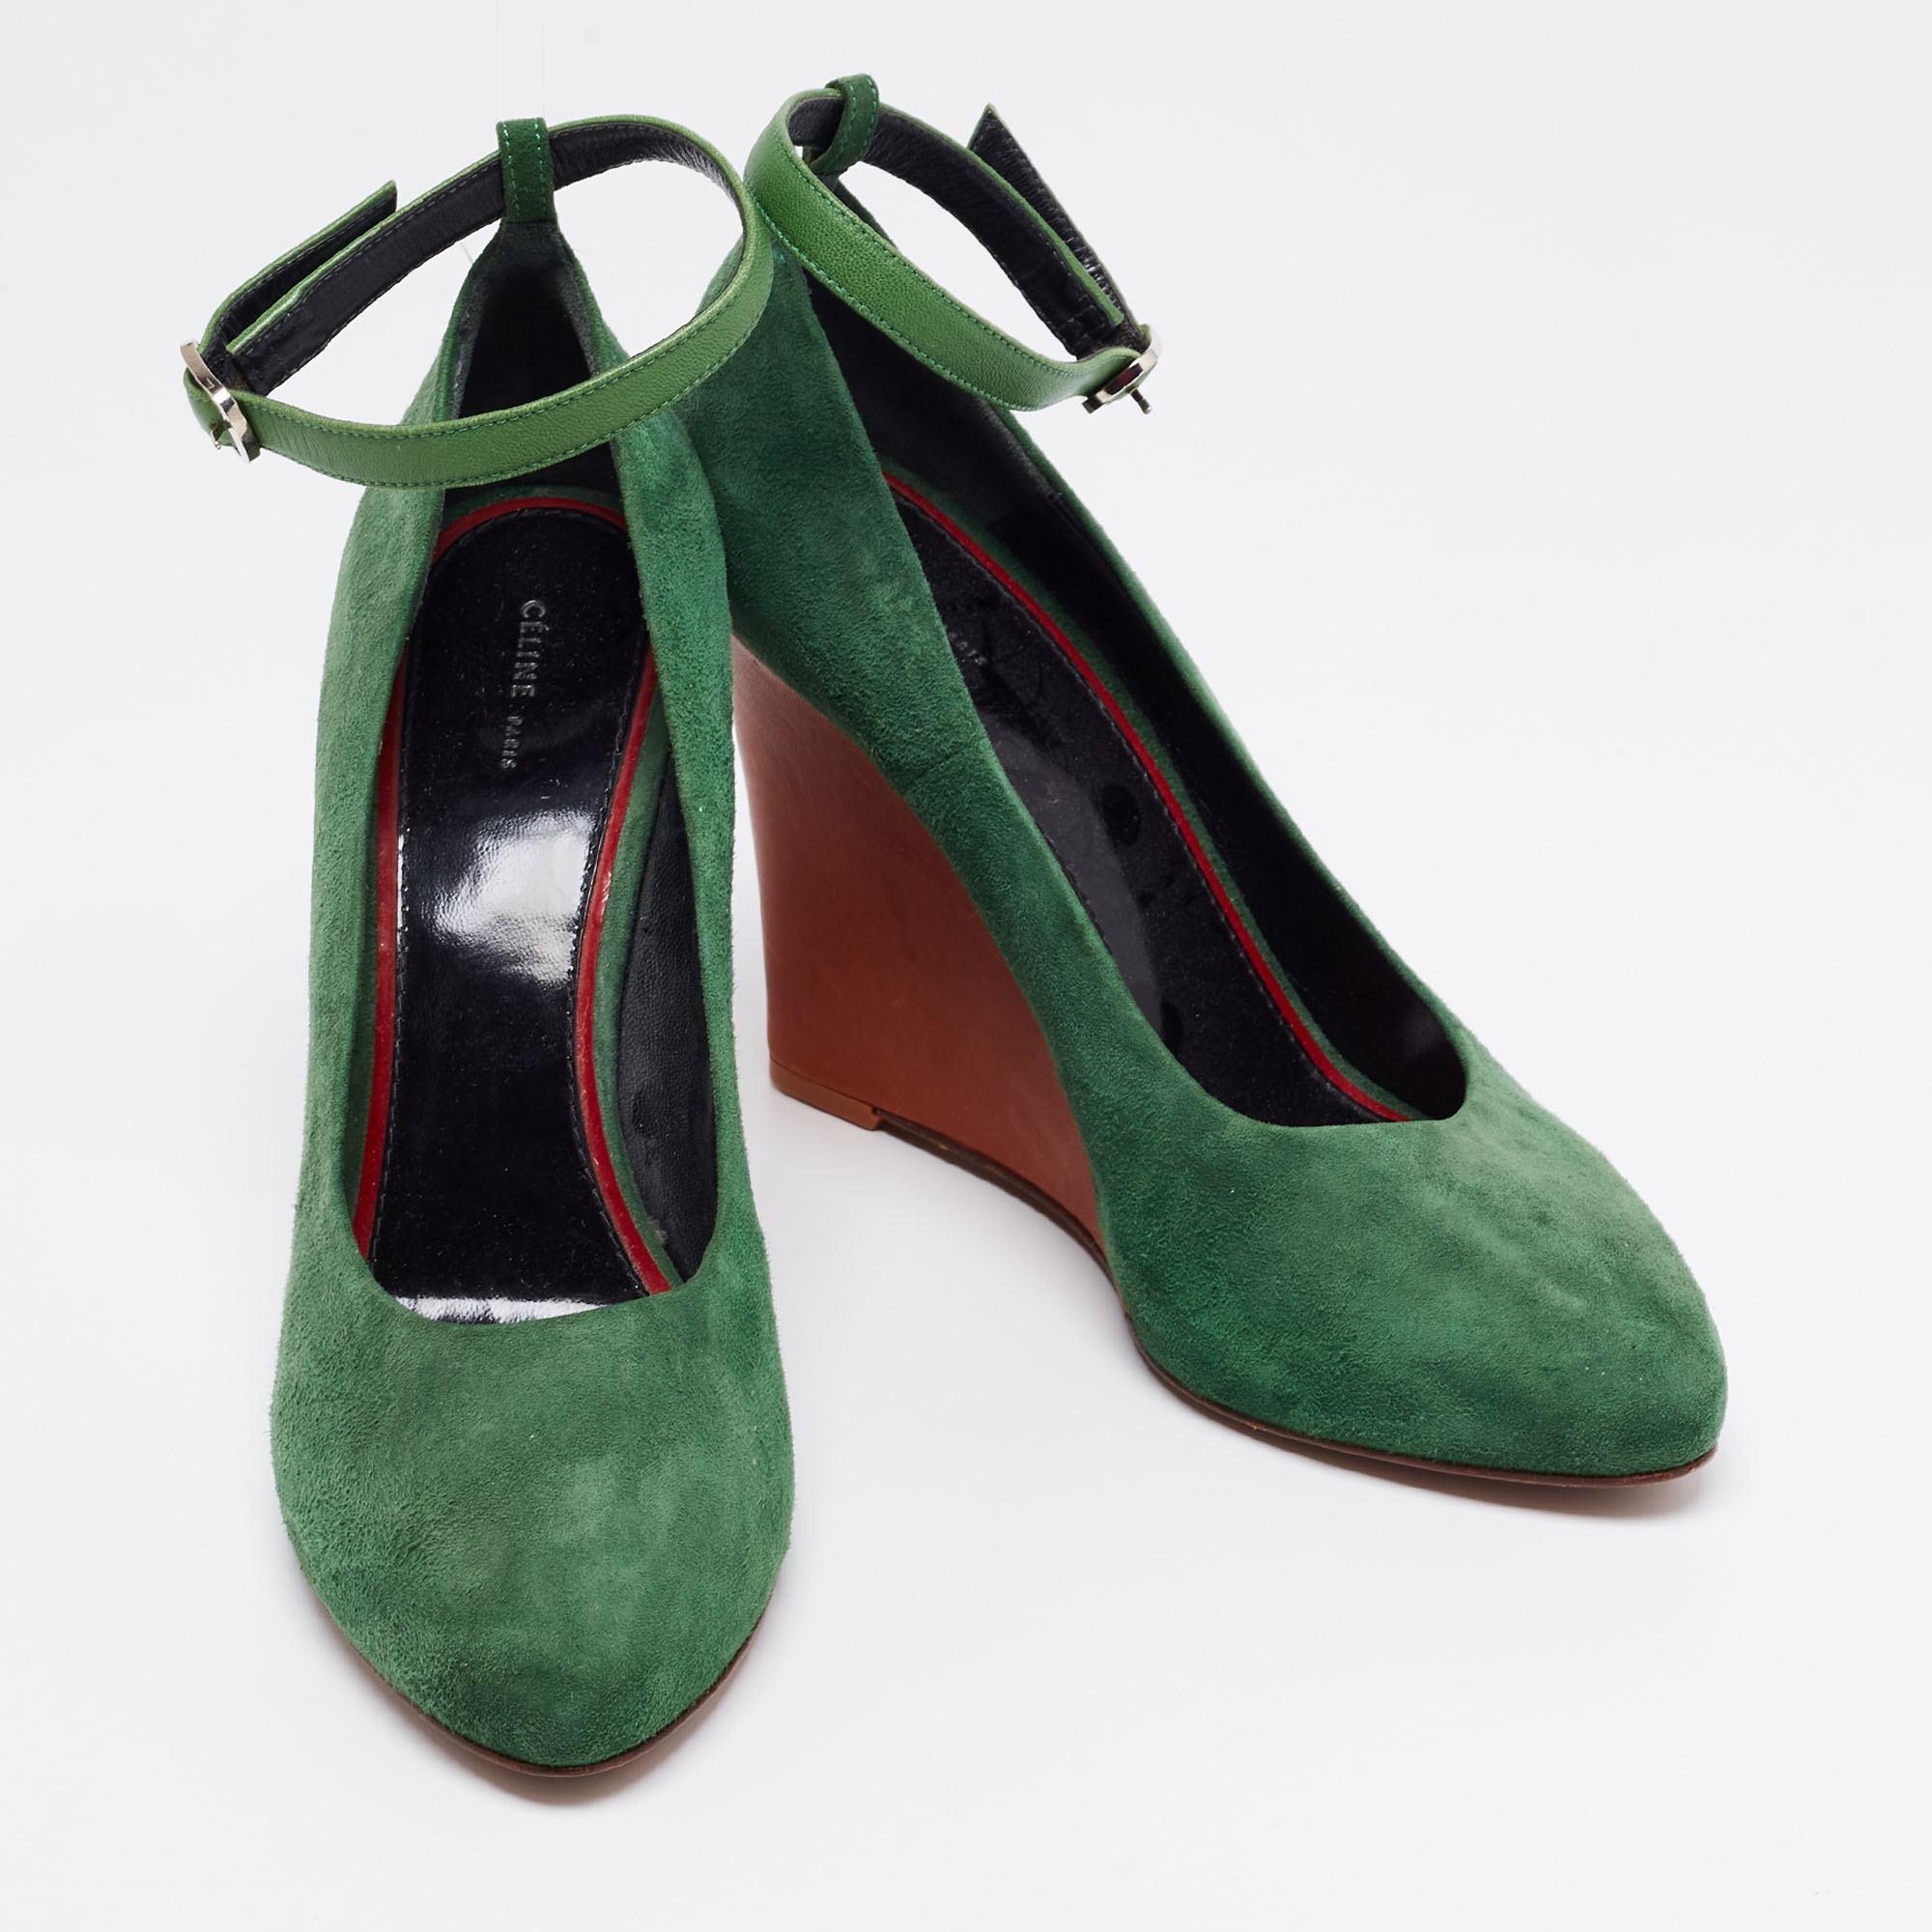 Celine Green Suede Wedge Ankle Strap Pumps Size 39